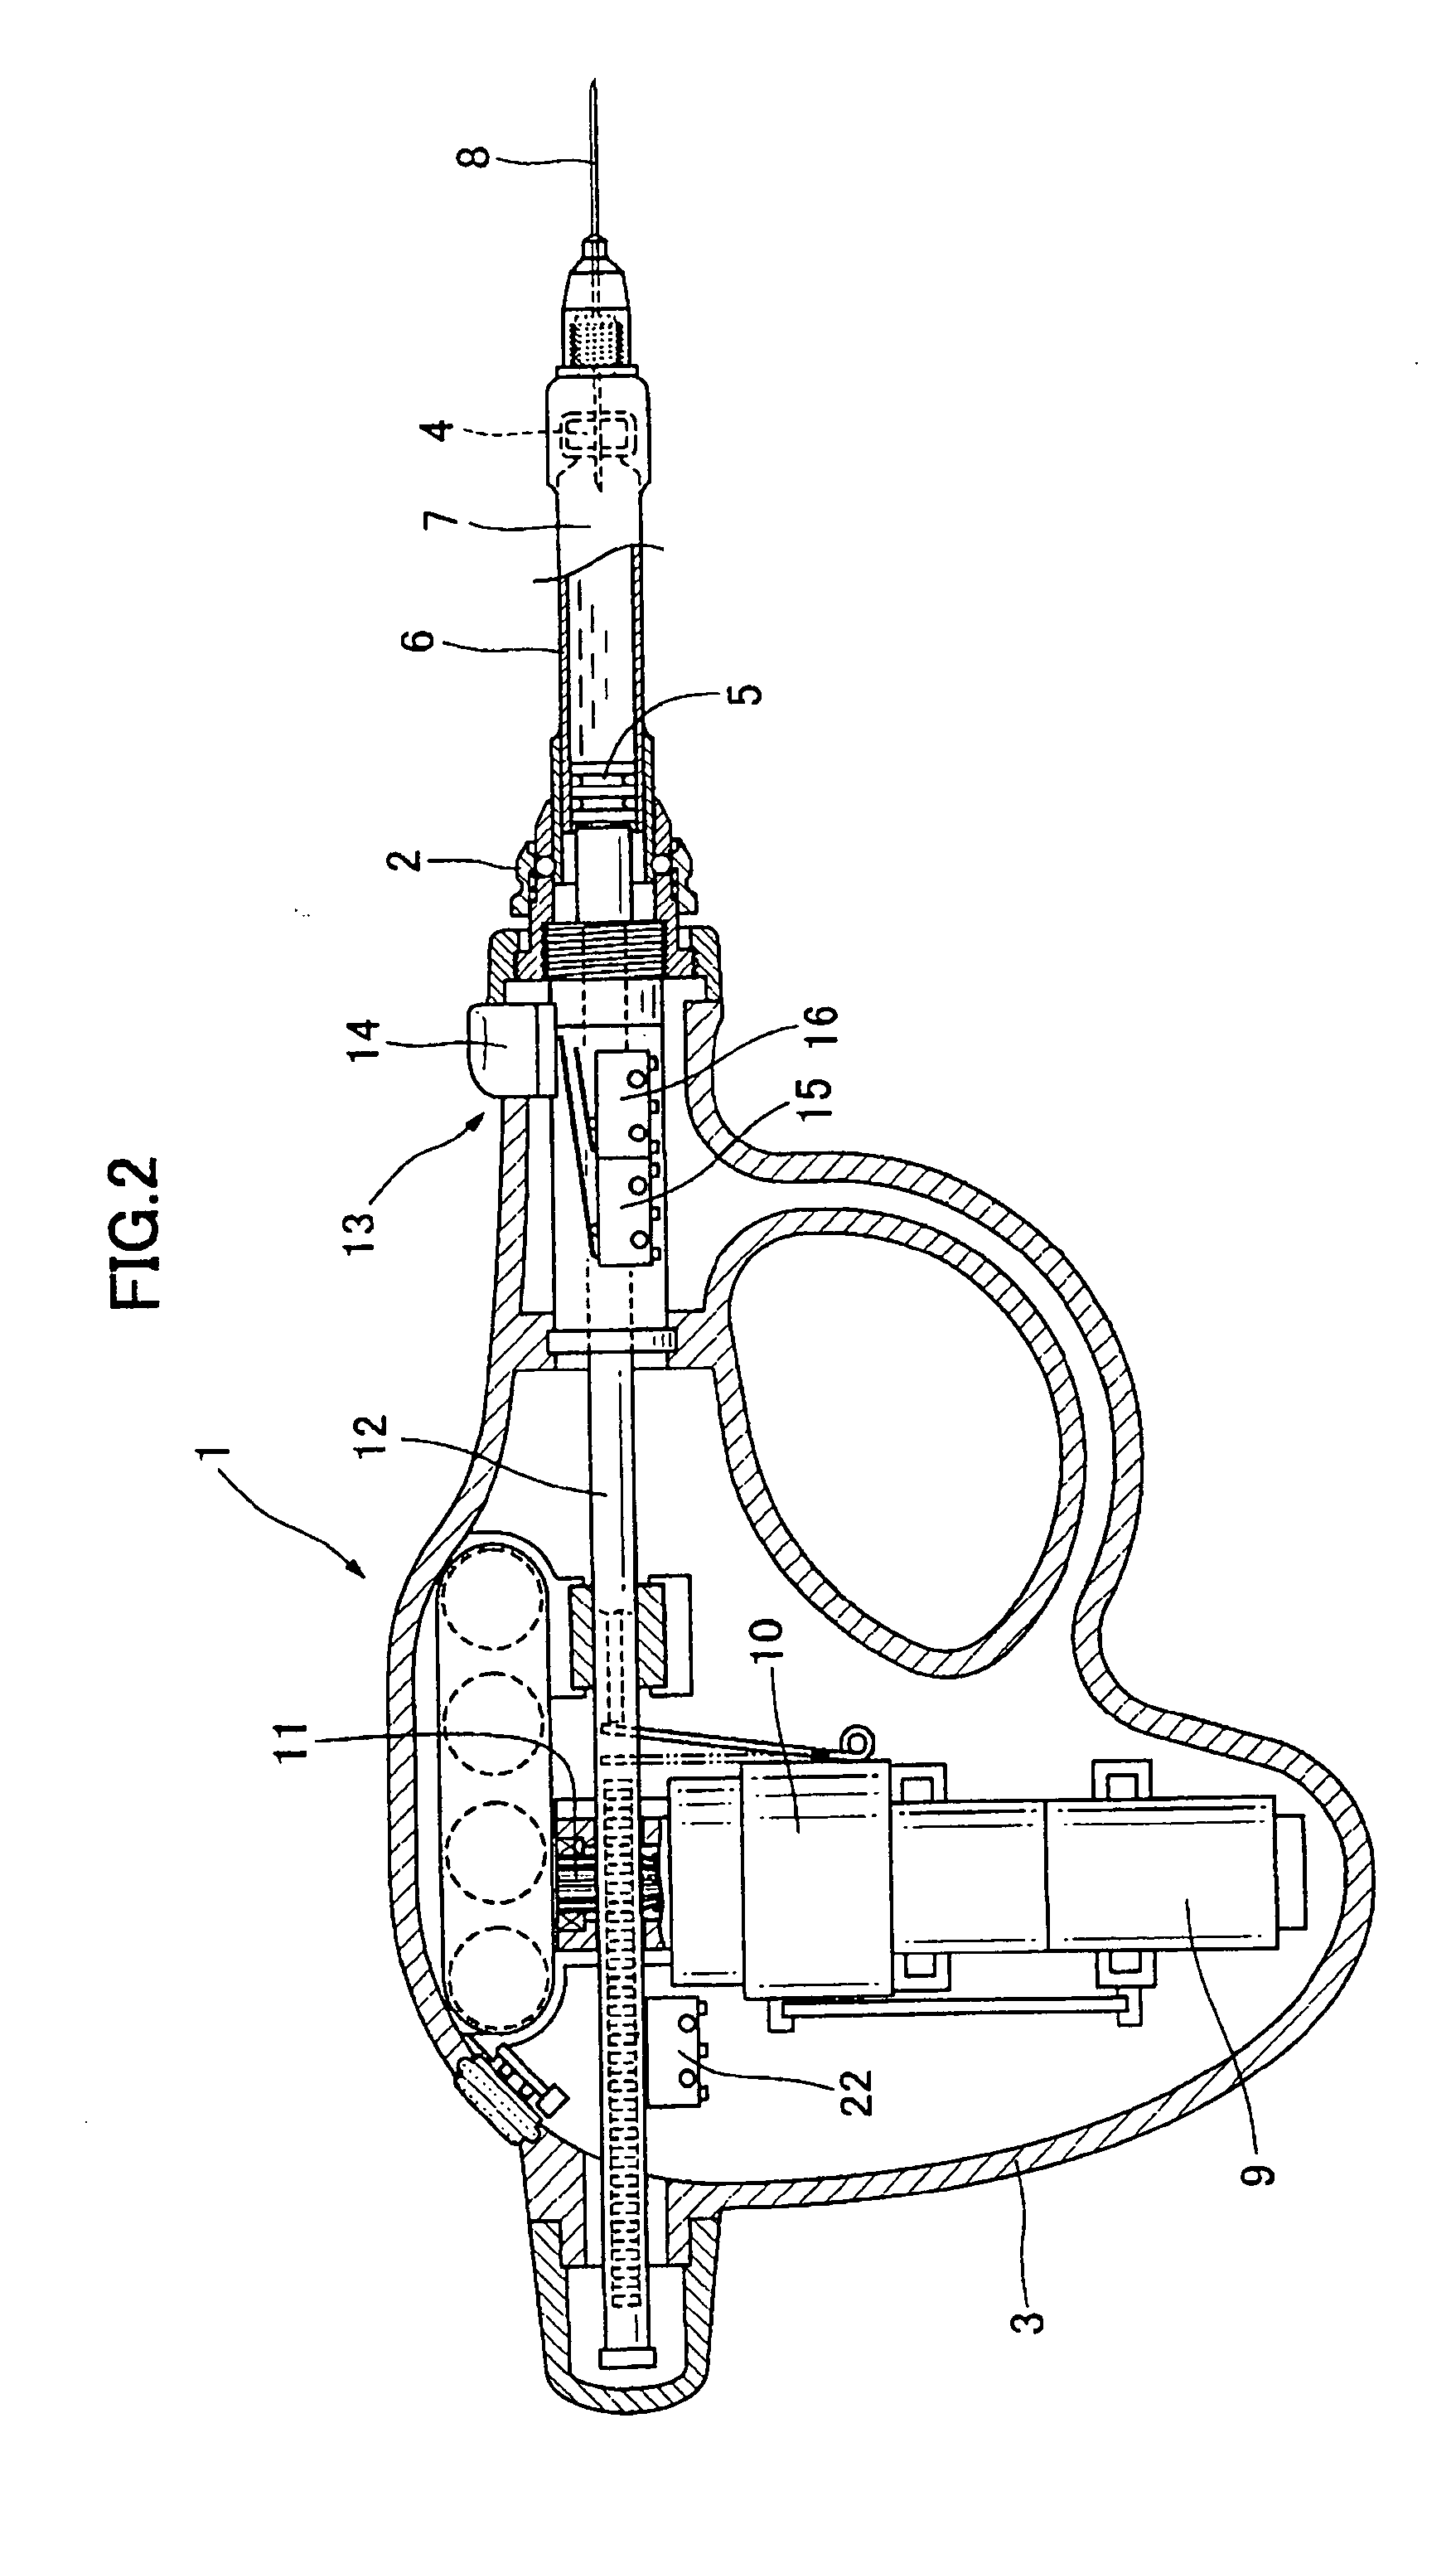 Method and apparatus for controlling the injection rate of a drug solution in a cartridge type motor-driven dental injection syringe